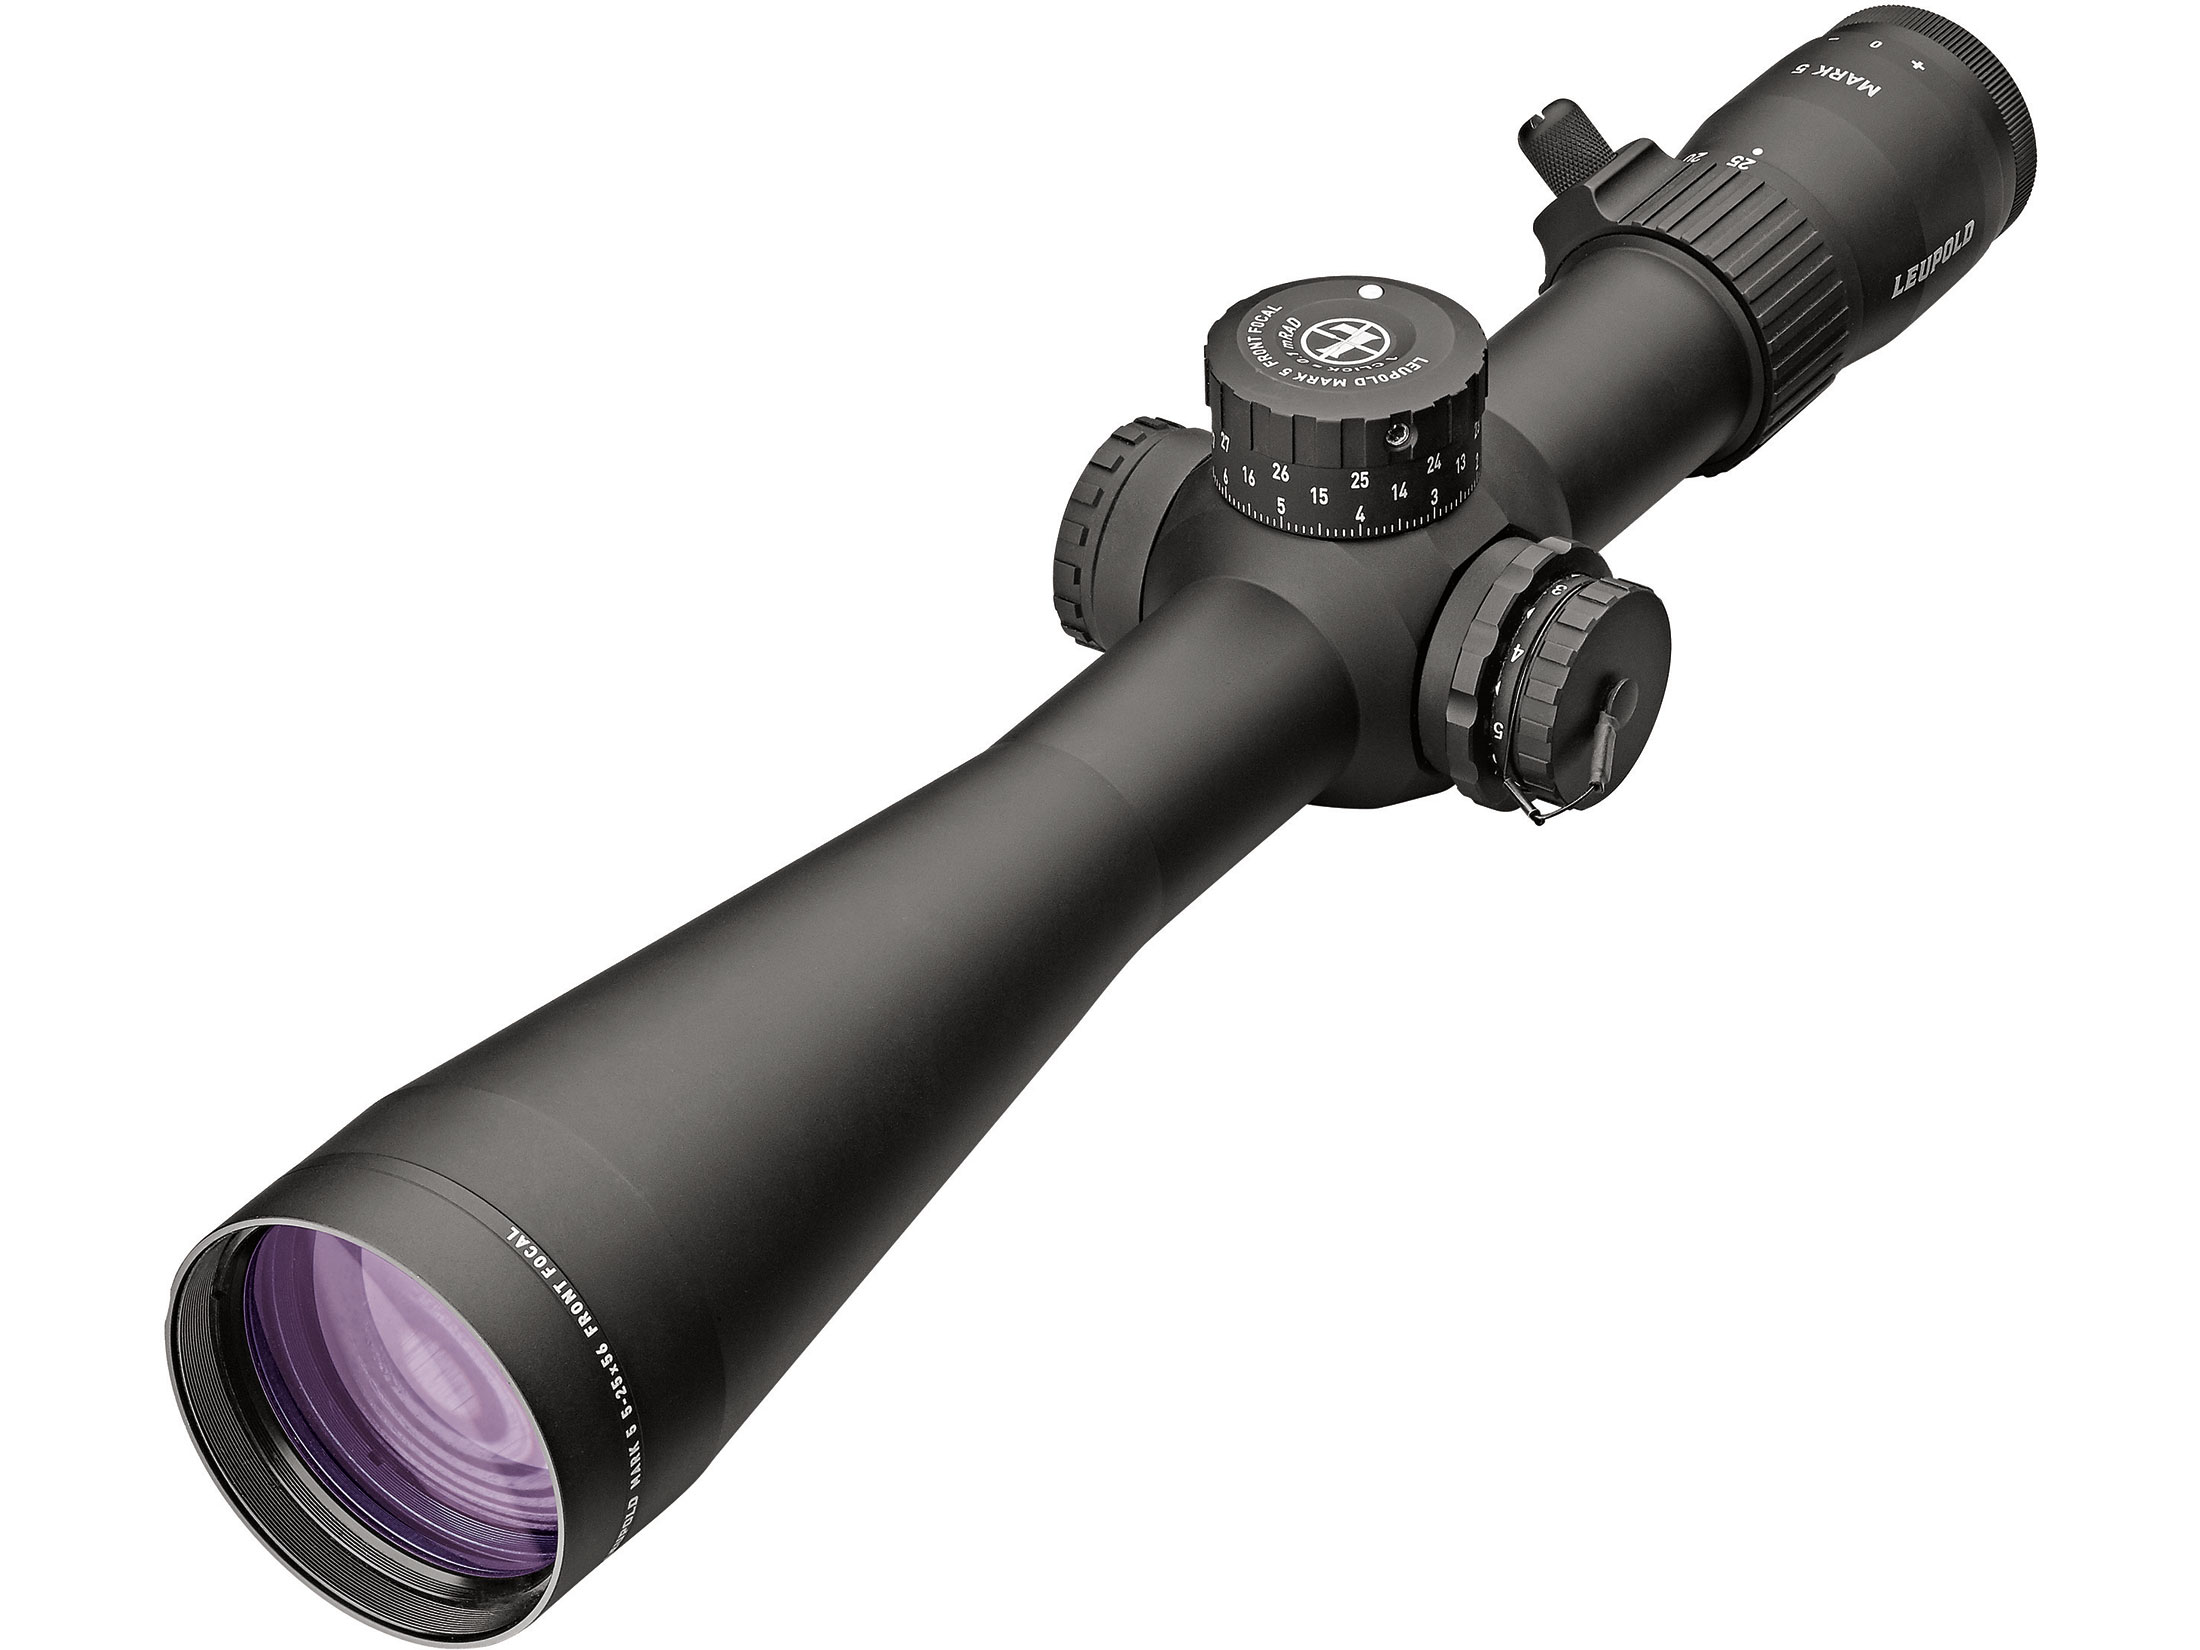 Leupold Mark 5 M5C3 Rifle Scope 35mm Tube 5-25x 56mm Zero Stop 1/10 Mil Adjustments First Focal Matte For Sale